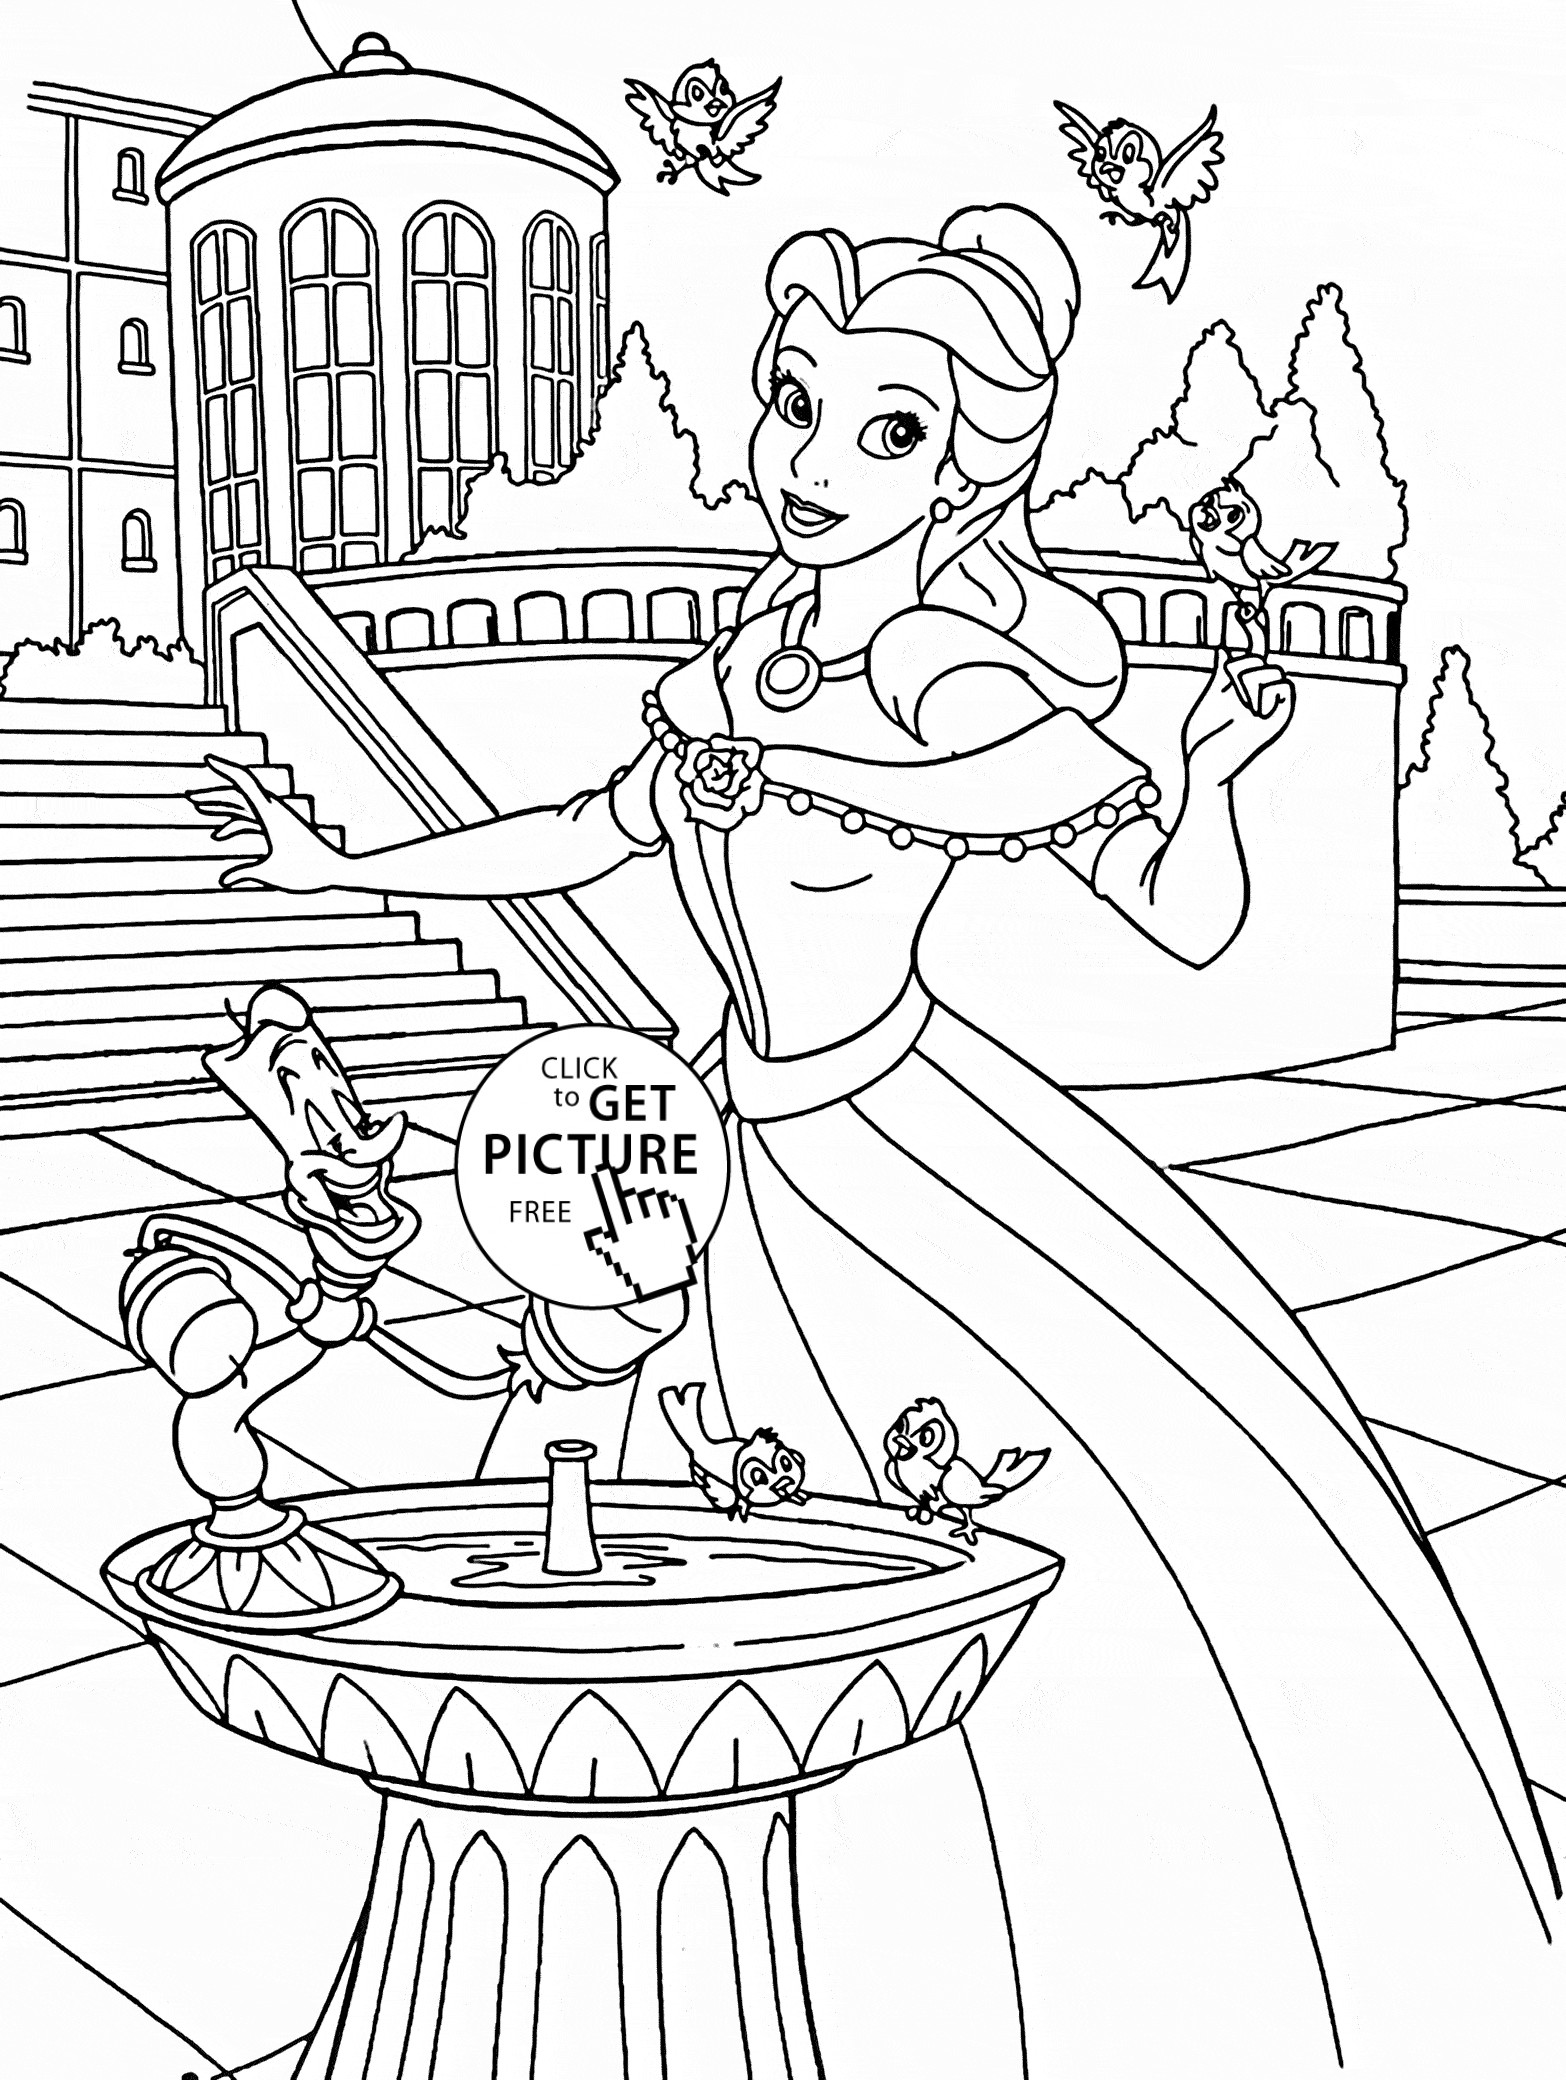 Marvelous Design Ideas Castle Coloring Pages Princess Bell In the